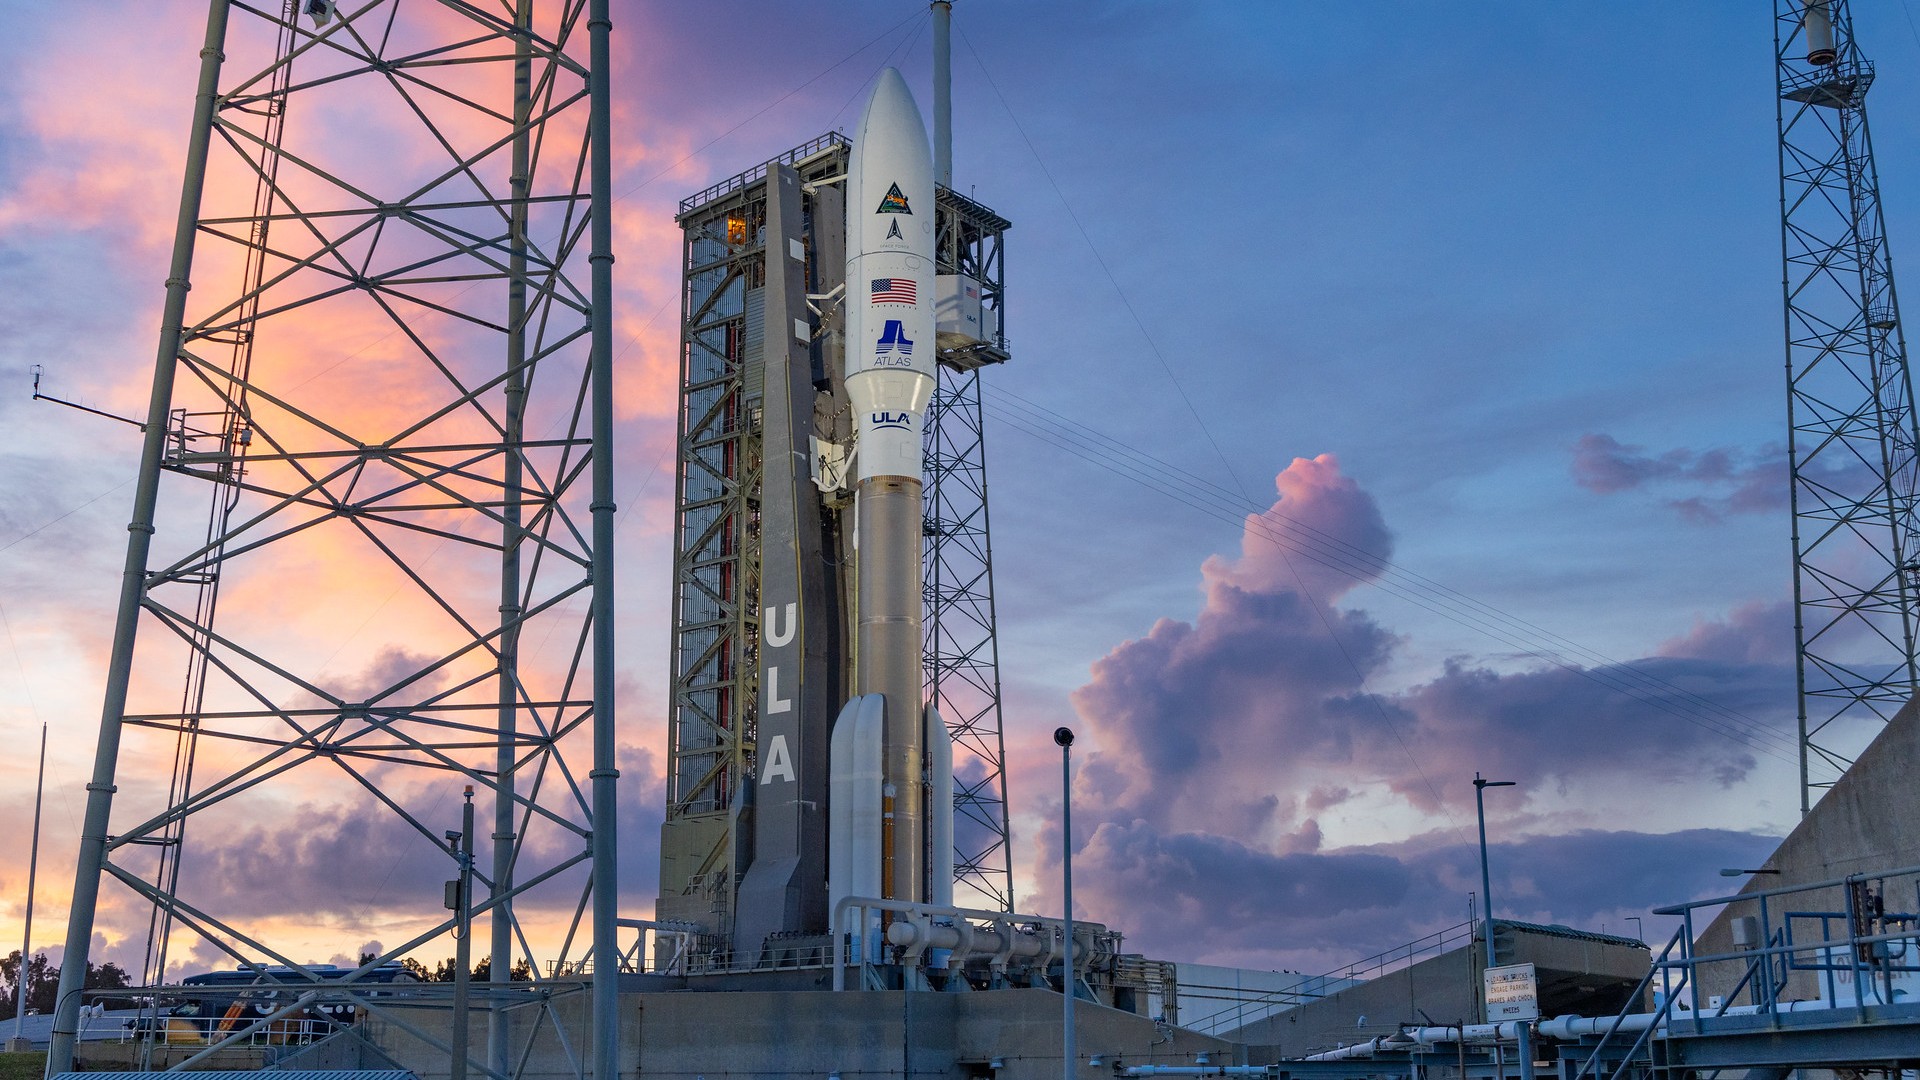 Atlas V rocket will now launch Space Force's Silent Barker 'watchdog' mission on Sept. 10 after delays. Here's how to watch live. | Space